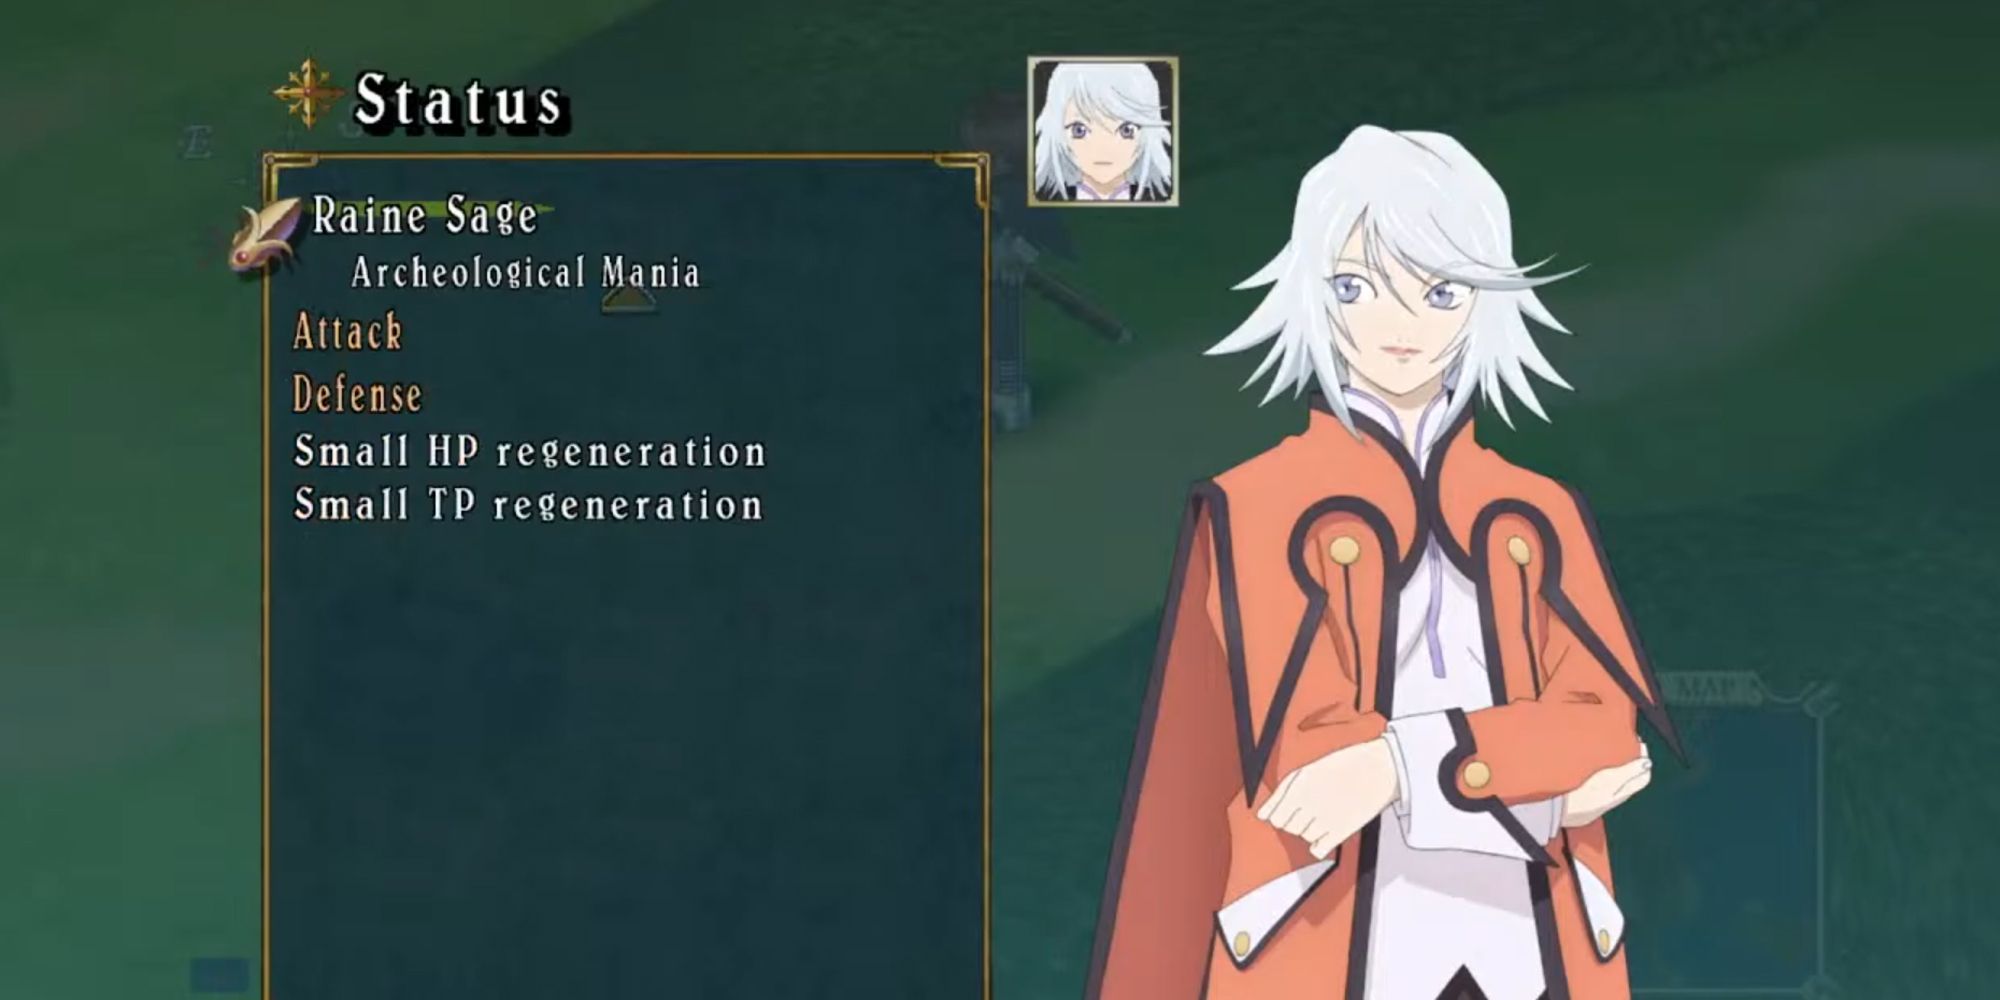 Screen showing Raine's status. On the left are status effects.